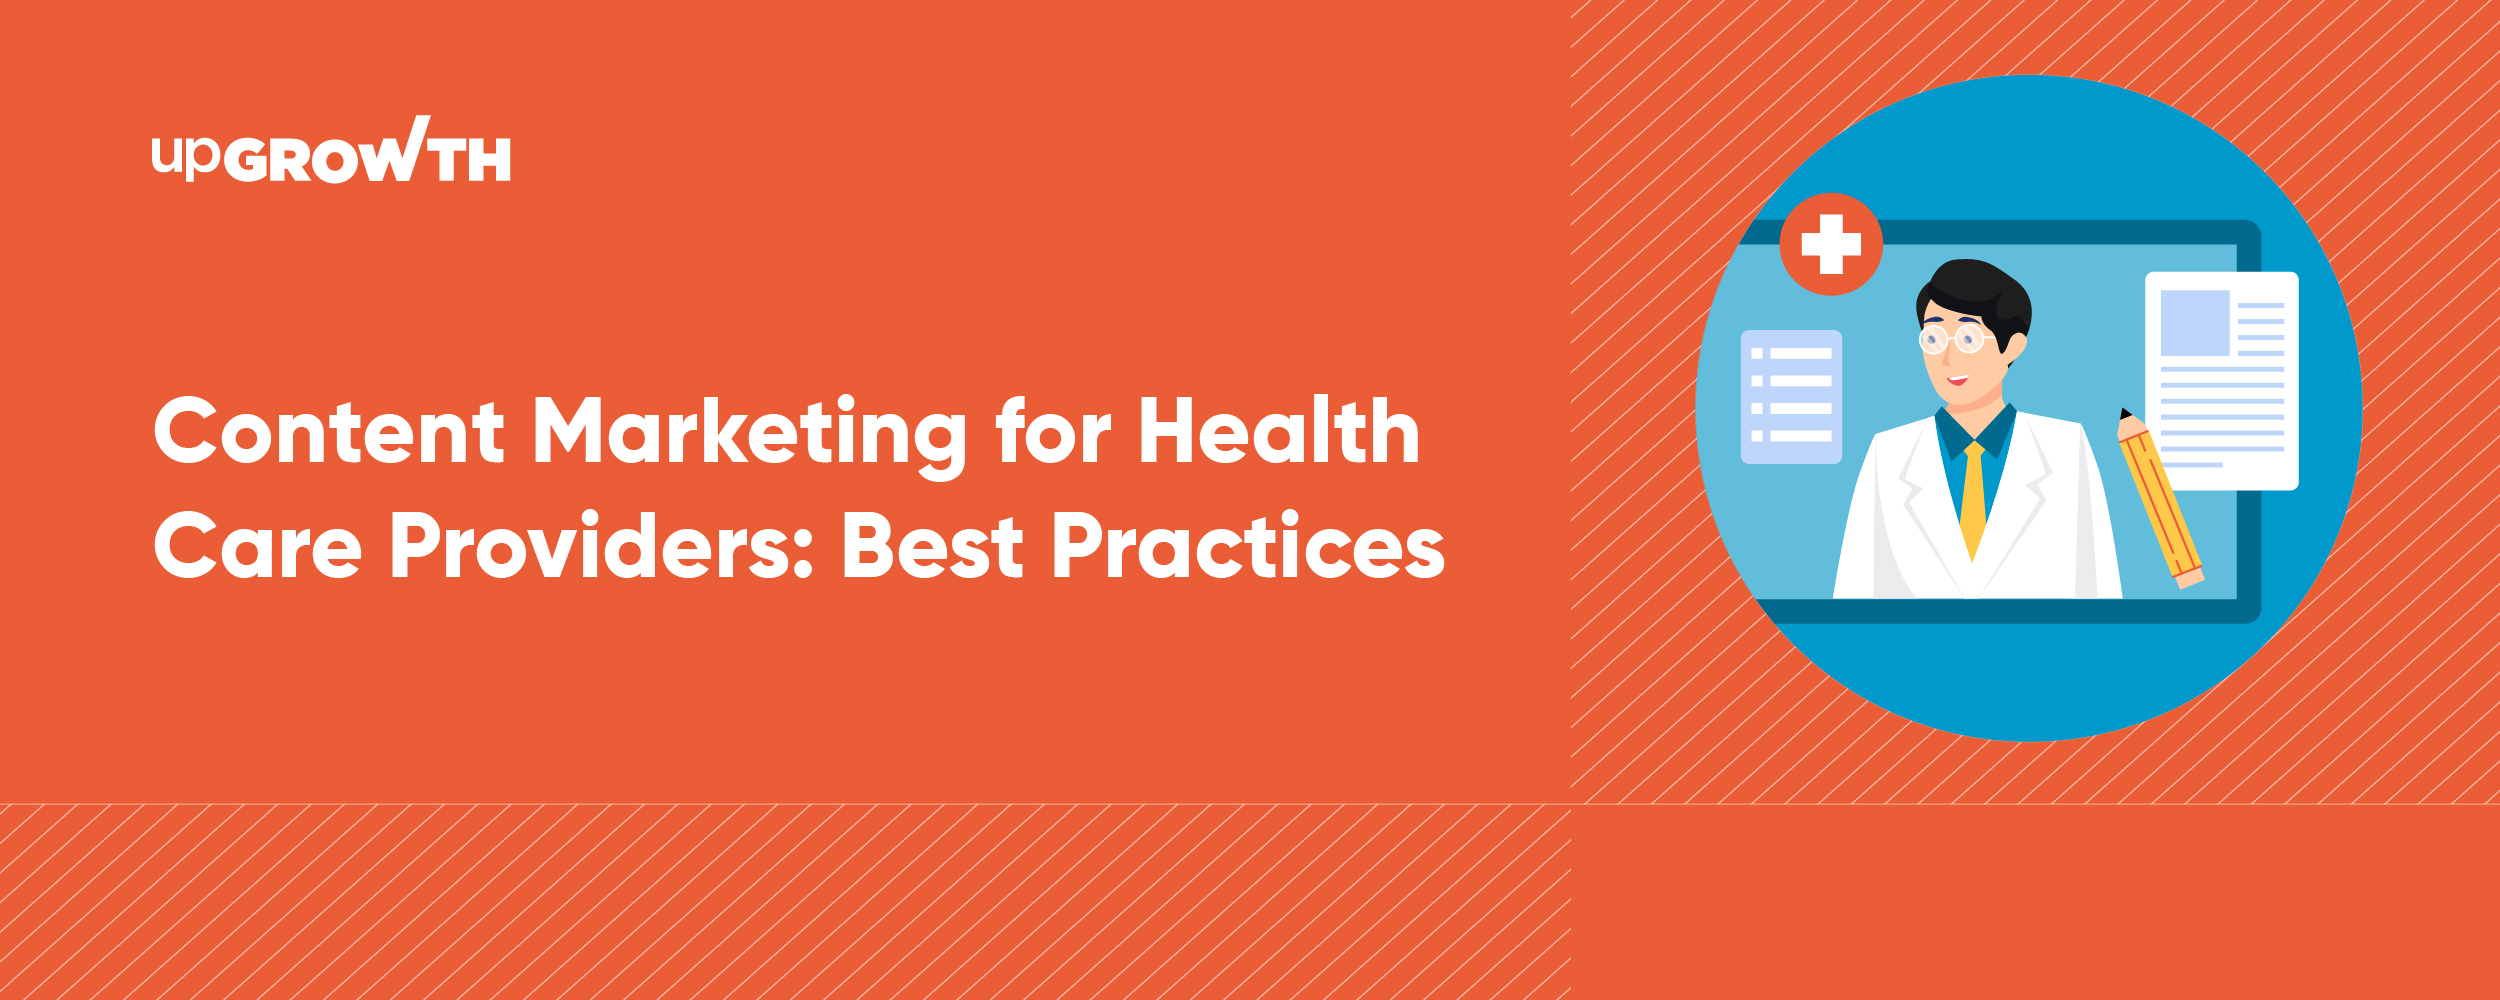 Content Marketing for Health Care Providers